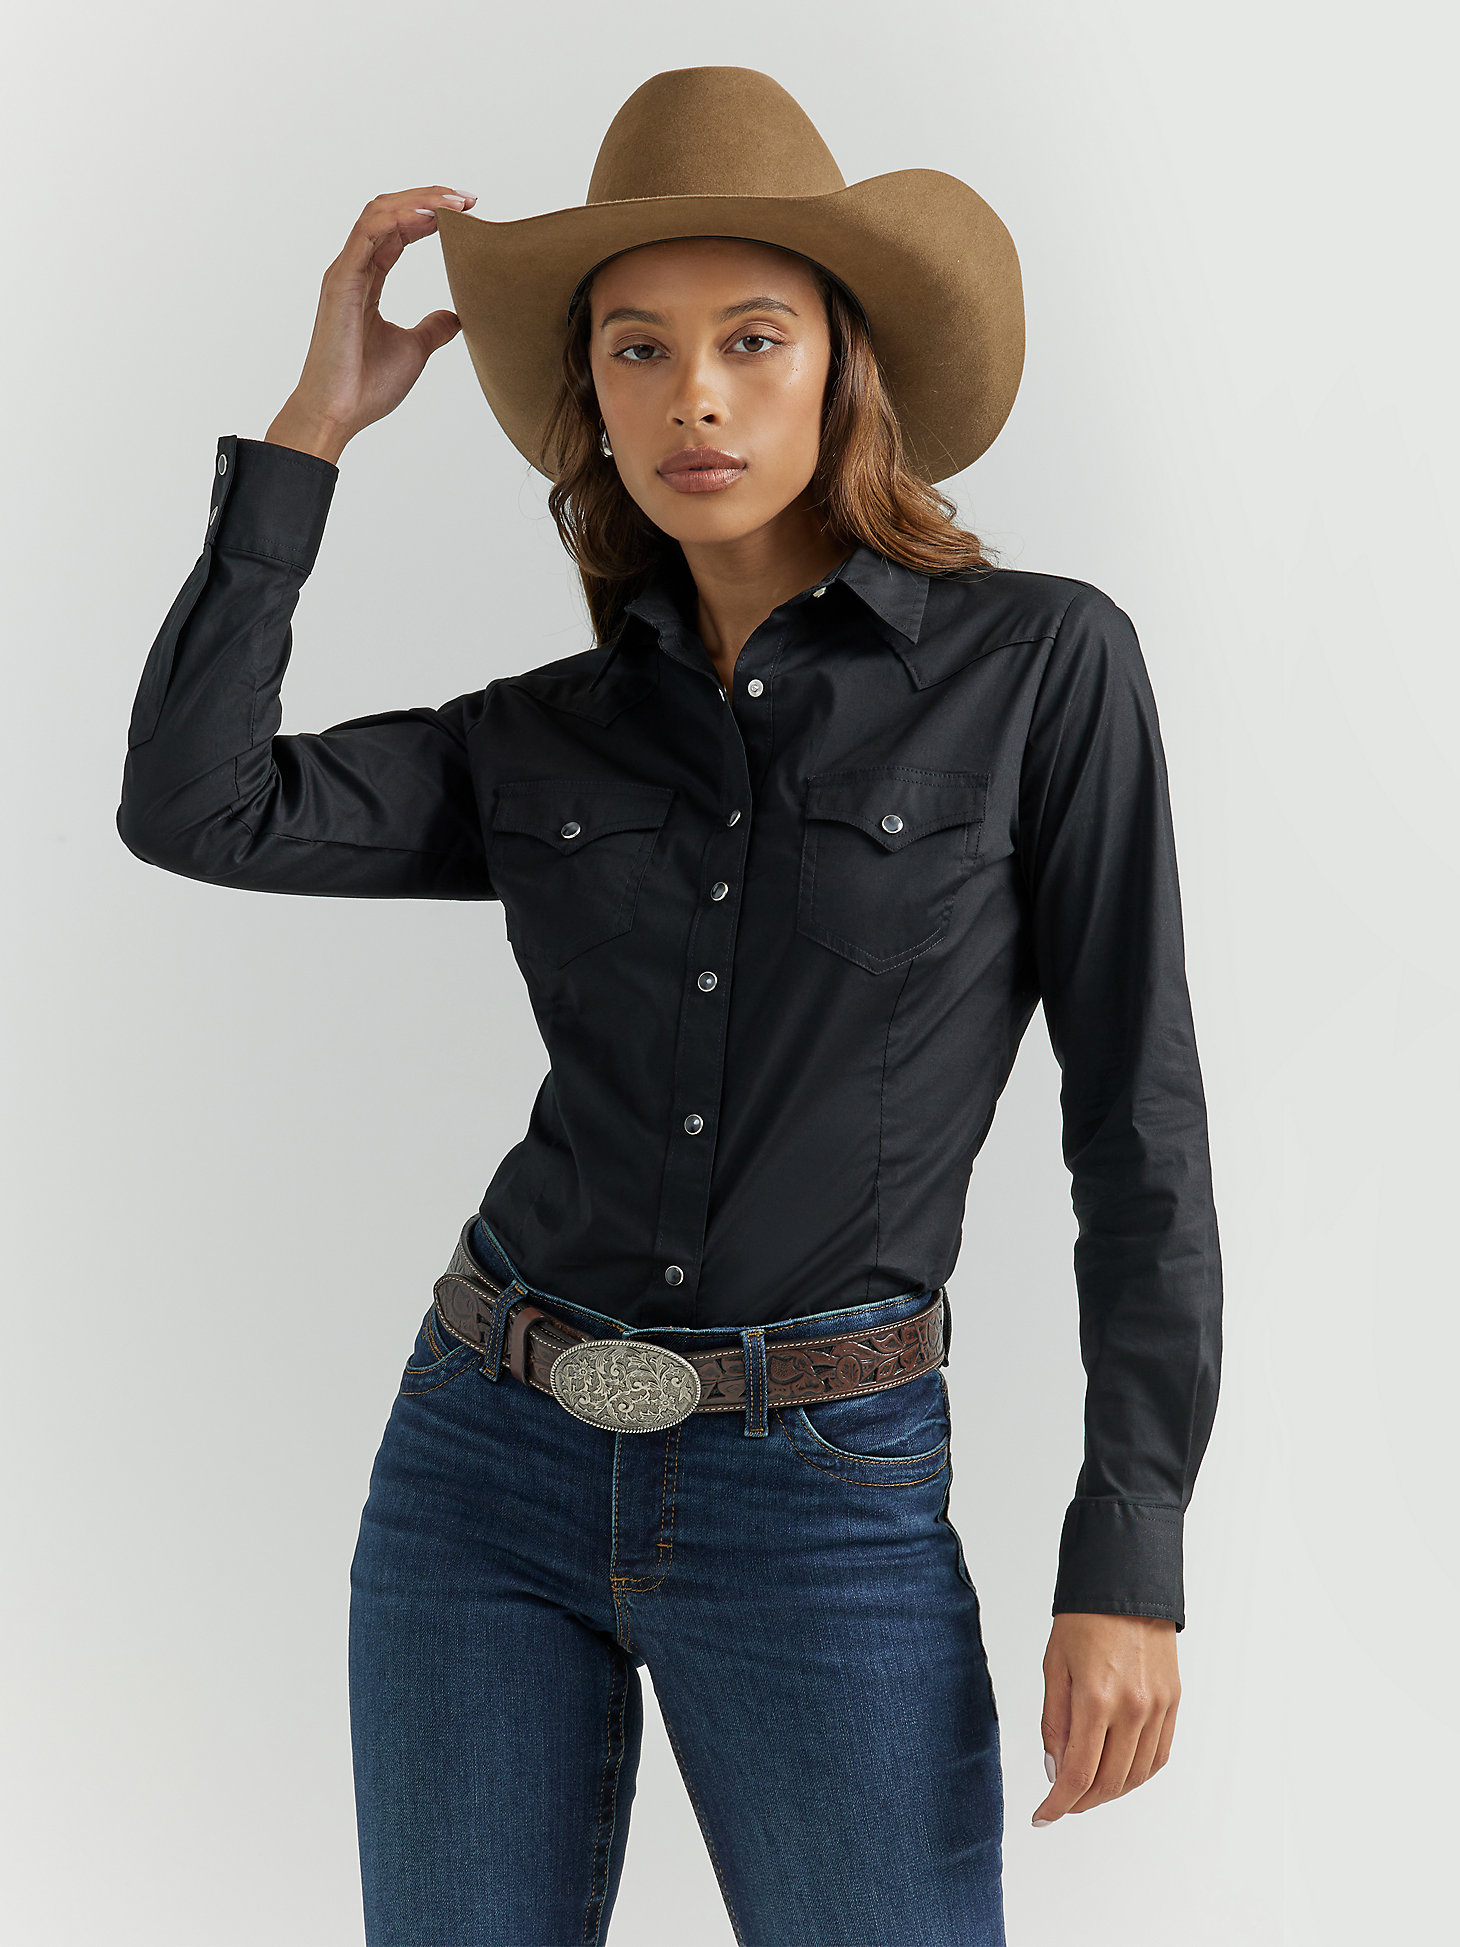 Wrangler® Long Sleeve One Point Front and Back Yokes Solid Top in Black alternative view 1